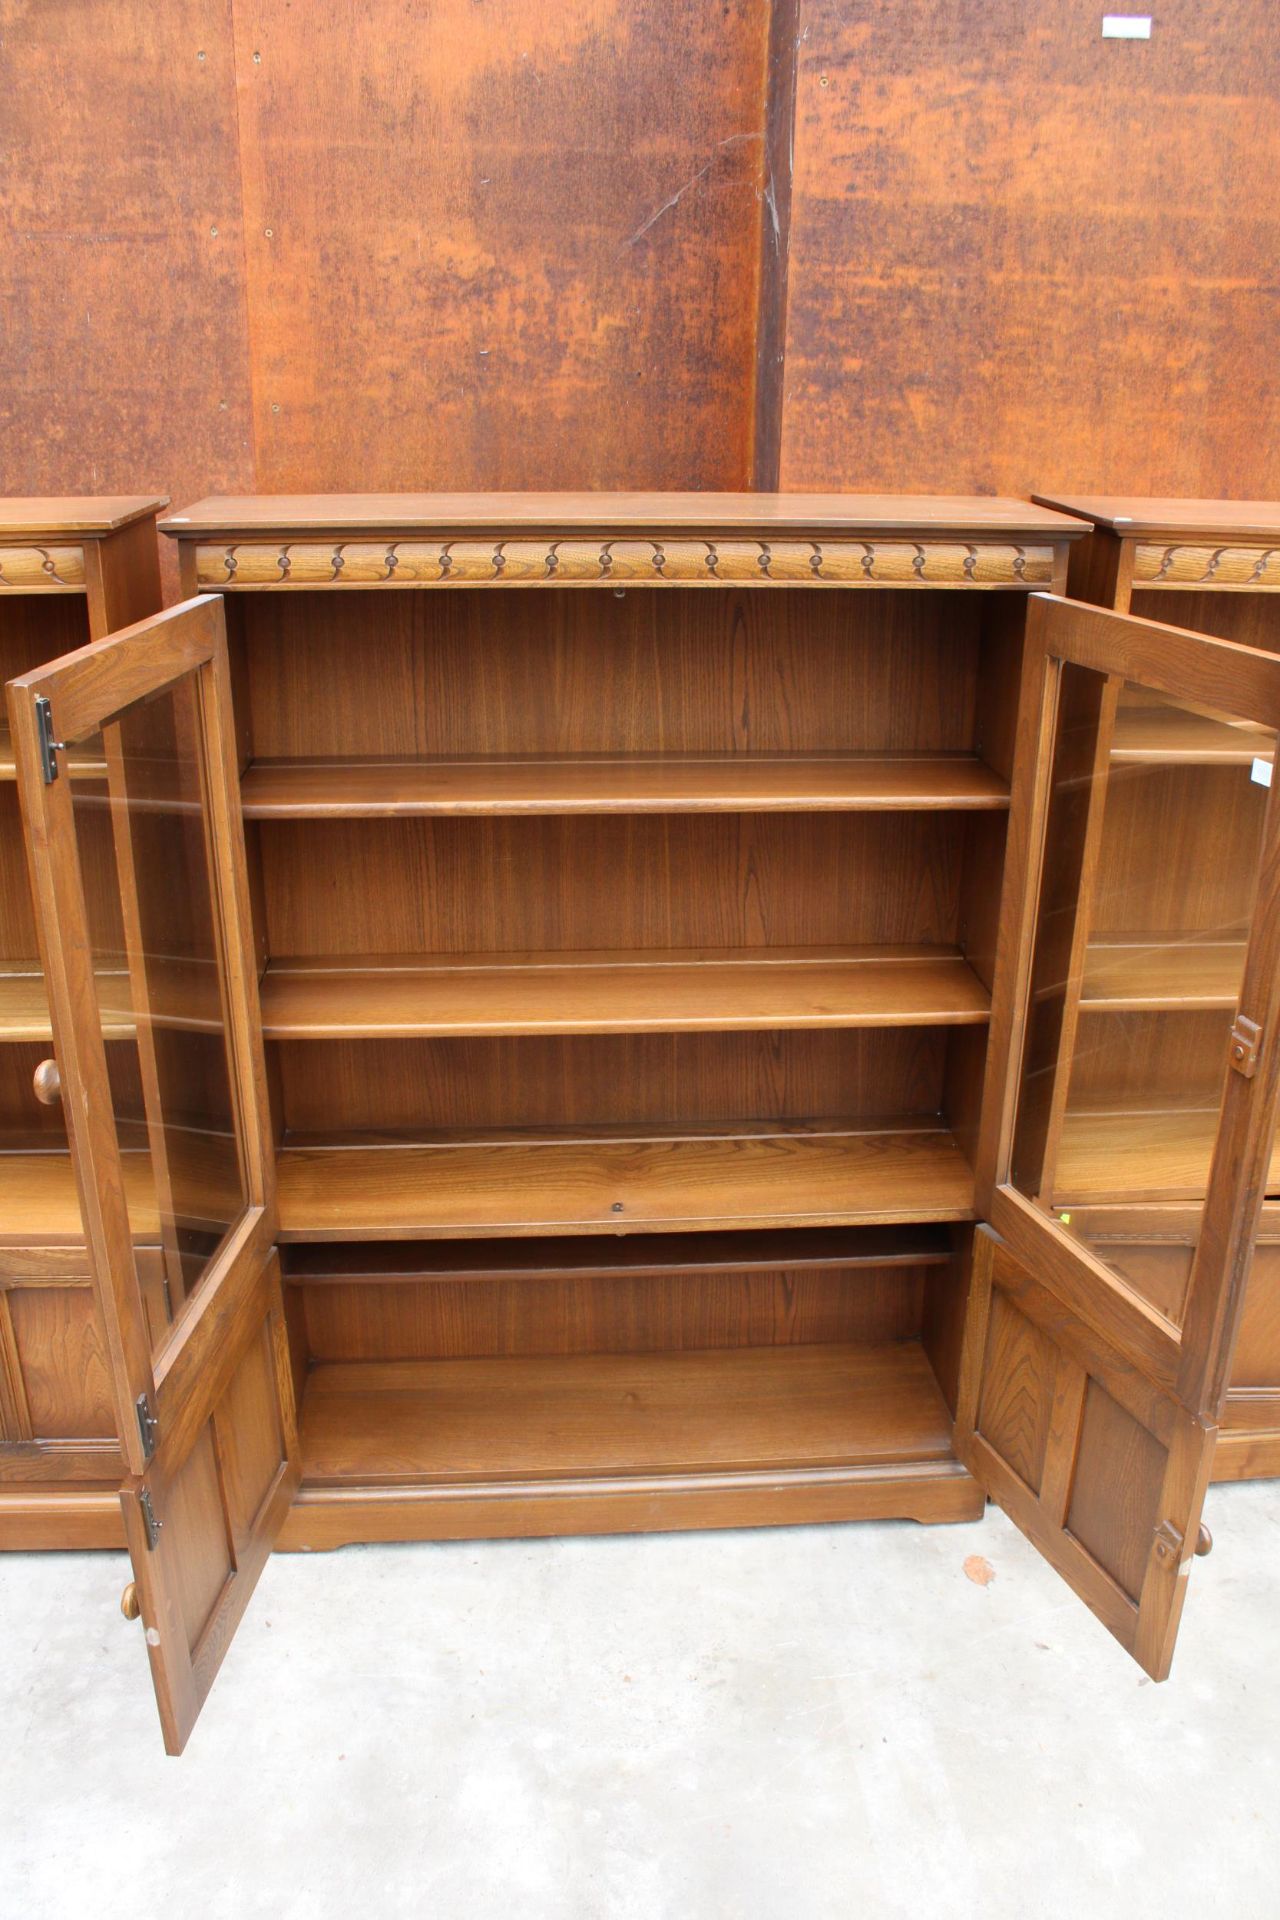 AN ERCOL BLONDE TWO DOOR BOOKCASE WITH CUPBOARD TO BASE 39.5" WIDE - Image 3 of 3